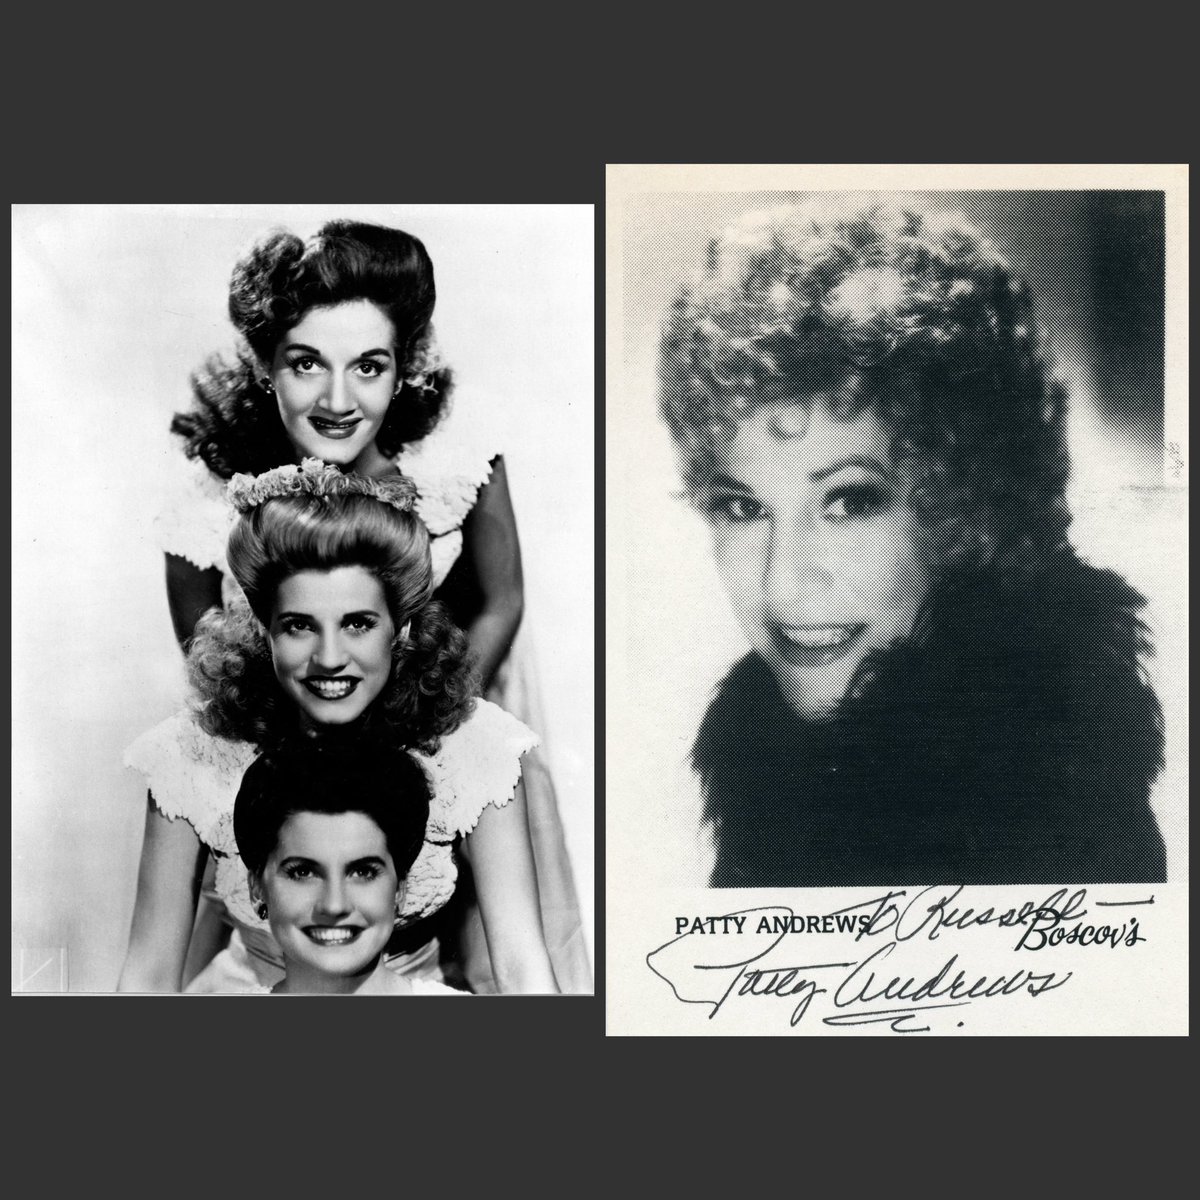 Born February 16, 1918 in Mound, Minnesota - Remembering Patty Andrews, lead vocalist of the Andrews Sisters trio, who entertained the USA during WWII and beyond. ⭐️ * 5 x 7 photo signed in 1995 for me by Patty Andrews, is from my collection. 🎙#PattyAndrews #TheAndrewsSisters